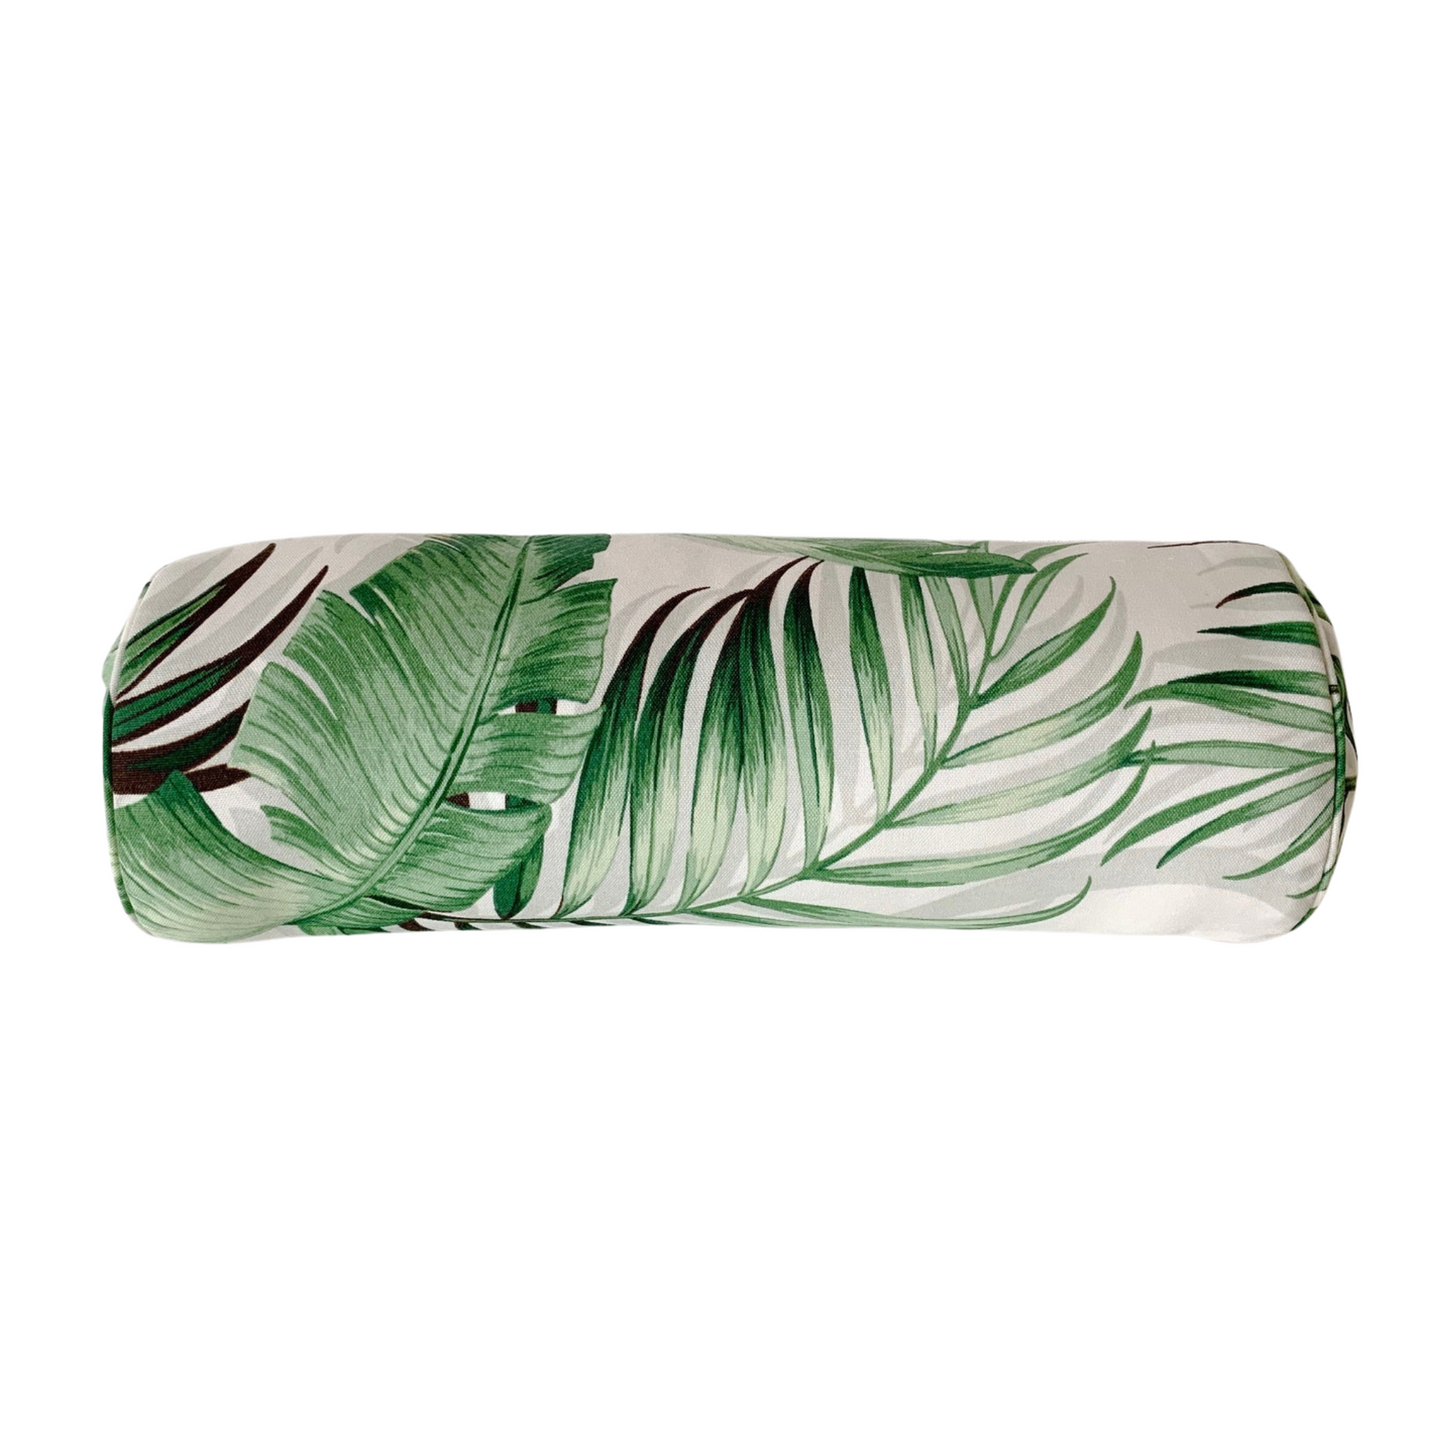 Tommy Bahama Palmiers Outdoor Pillow Cover in Verde - Tropical Palm Leaf  / Available in Throw, Lumbar, Bolster Pillow Covers